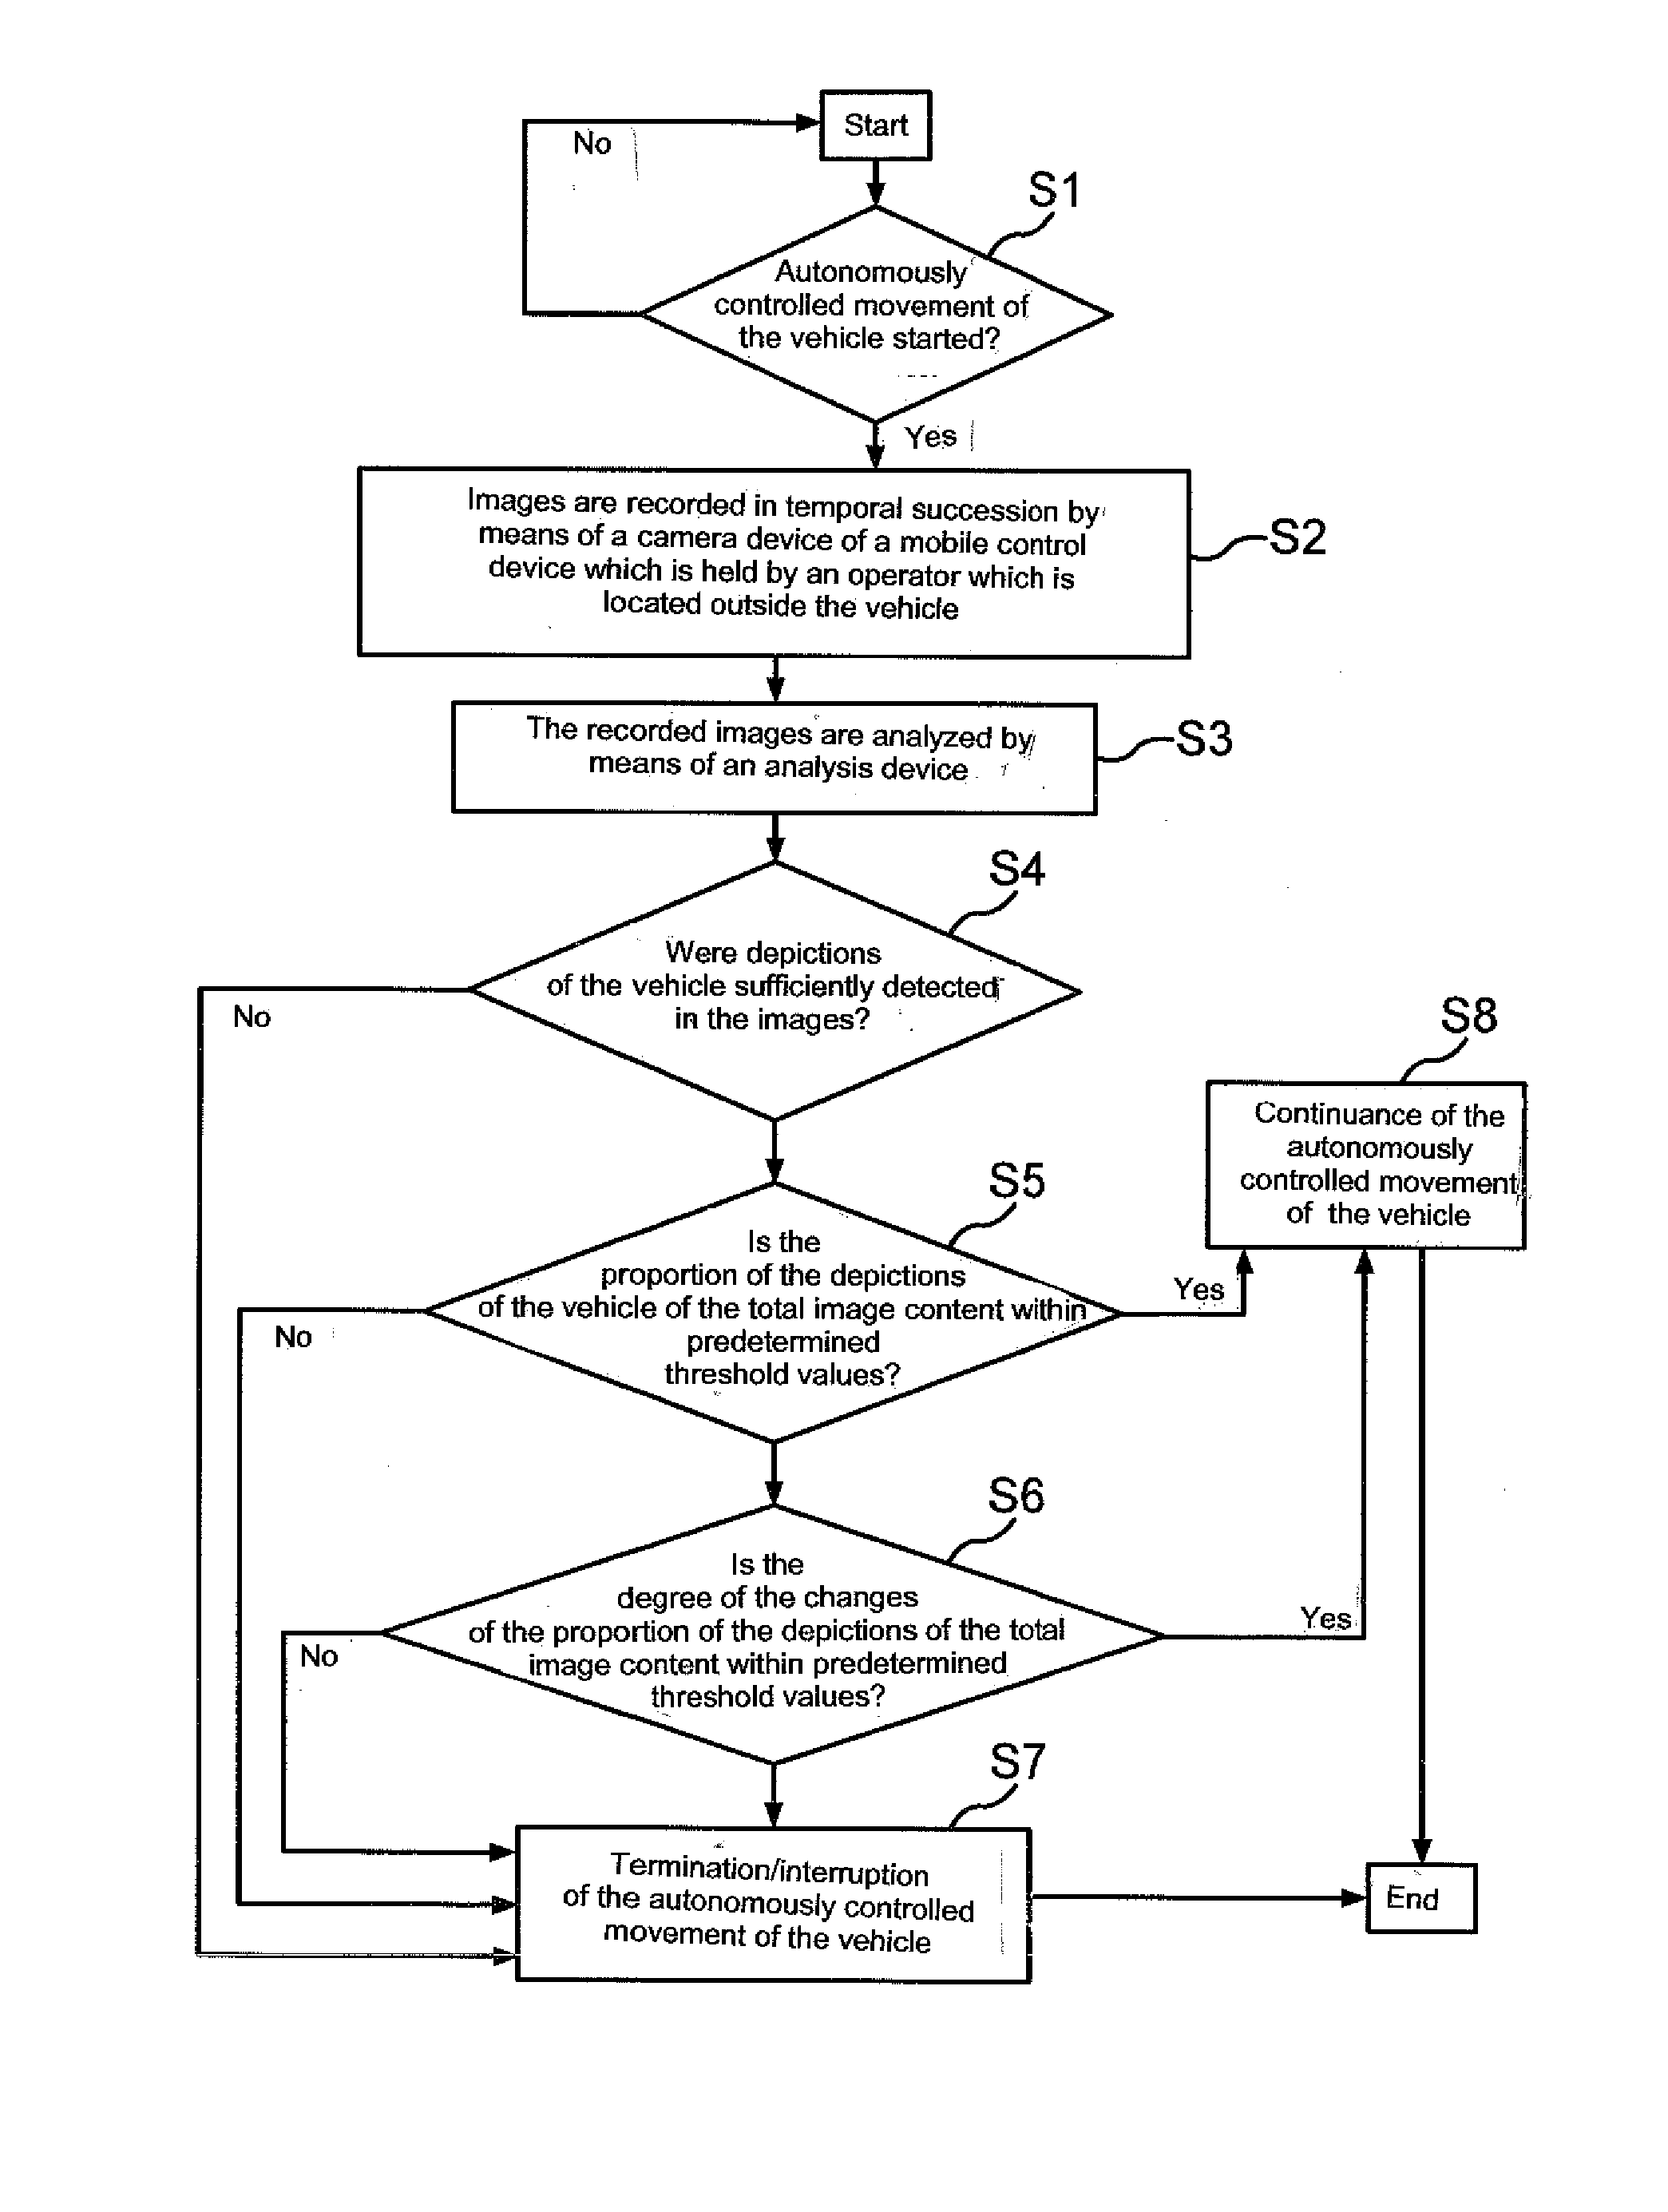 Method and system for operating a vehicle by monitoring the movement of the vehicle by means of a camera device of a mobile control device